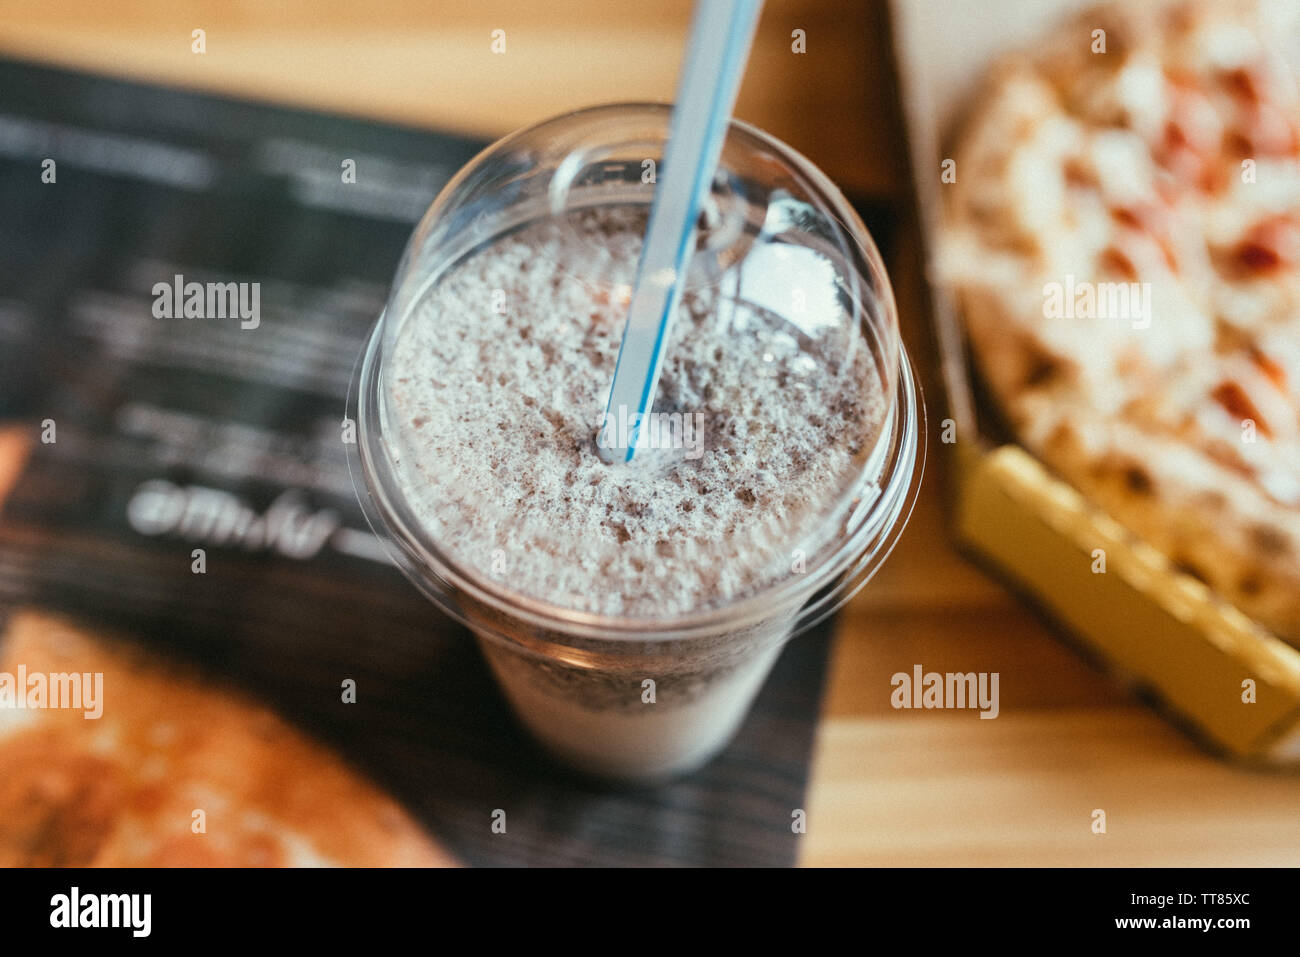 https://c8.alamy.com/comp/TT85XC/a-plastic-cup-with-a-straw-with-milkshake-and-cookies-inside-TT85XC.jpg